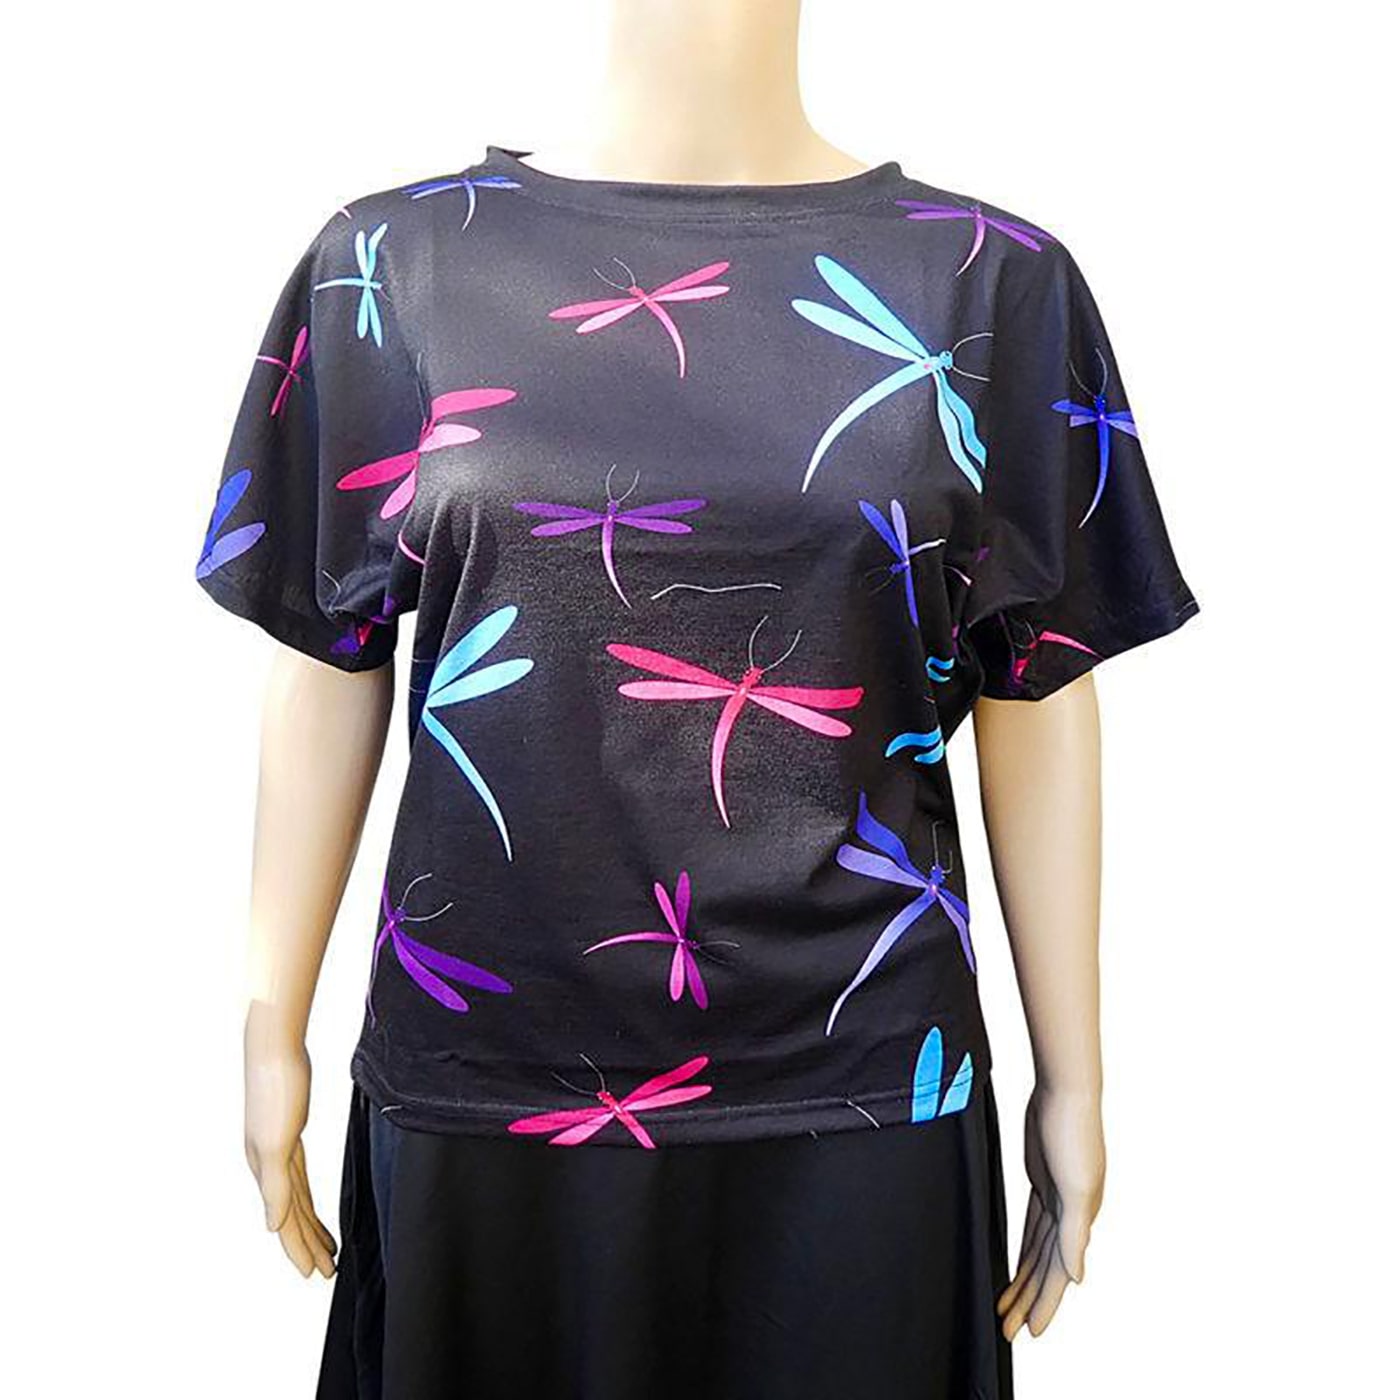 Midnight Dreaming Batwing Top by RainbowsAndFairies.com (Dragonfly - Purple & Blue - Butterfly - Kitsch - Shirt - Vintage Inspired - Rock & Roll) - SKU: CL_BATOP_DREAM_MID - Pic 01